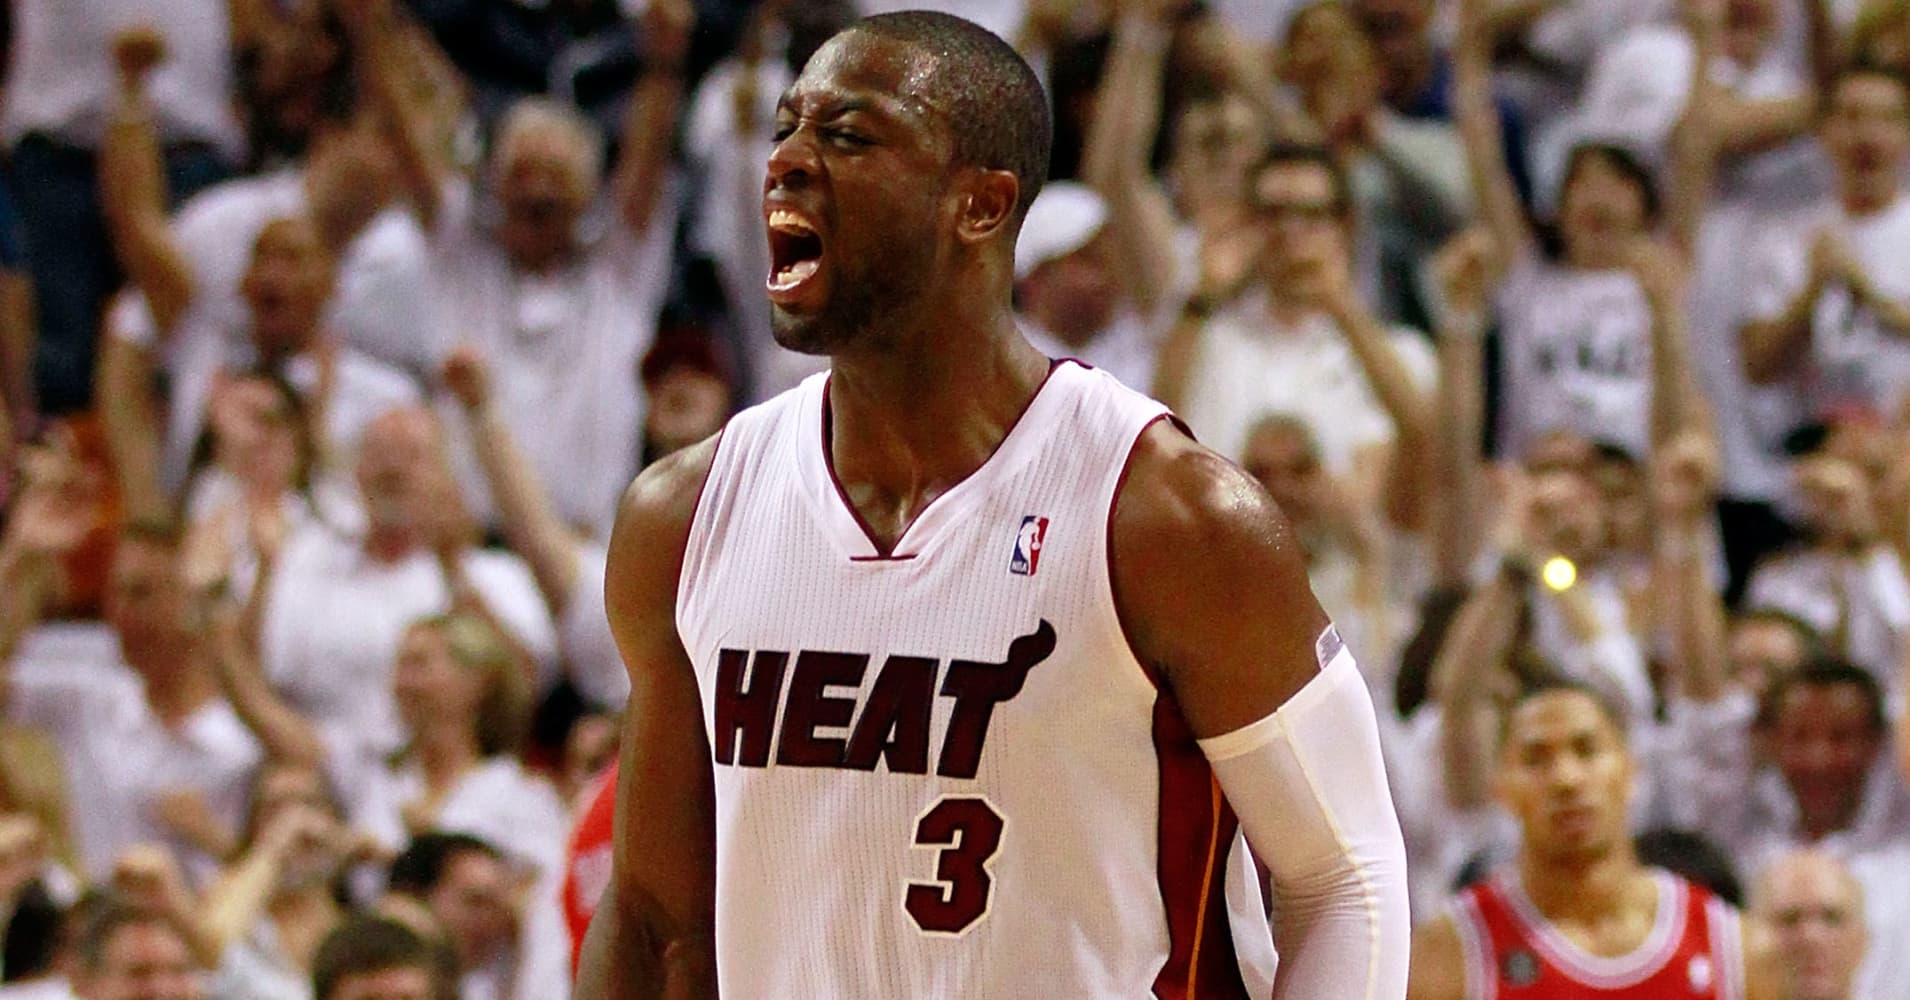 Miami Heat's Dwyane Wade mum for now on future plans, retirement